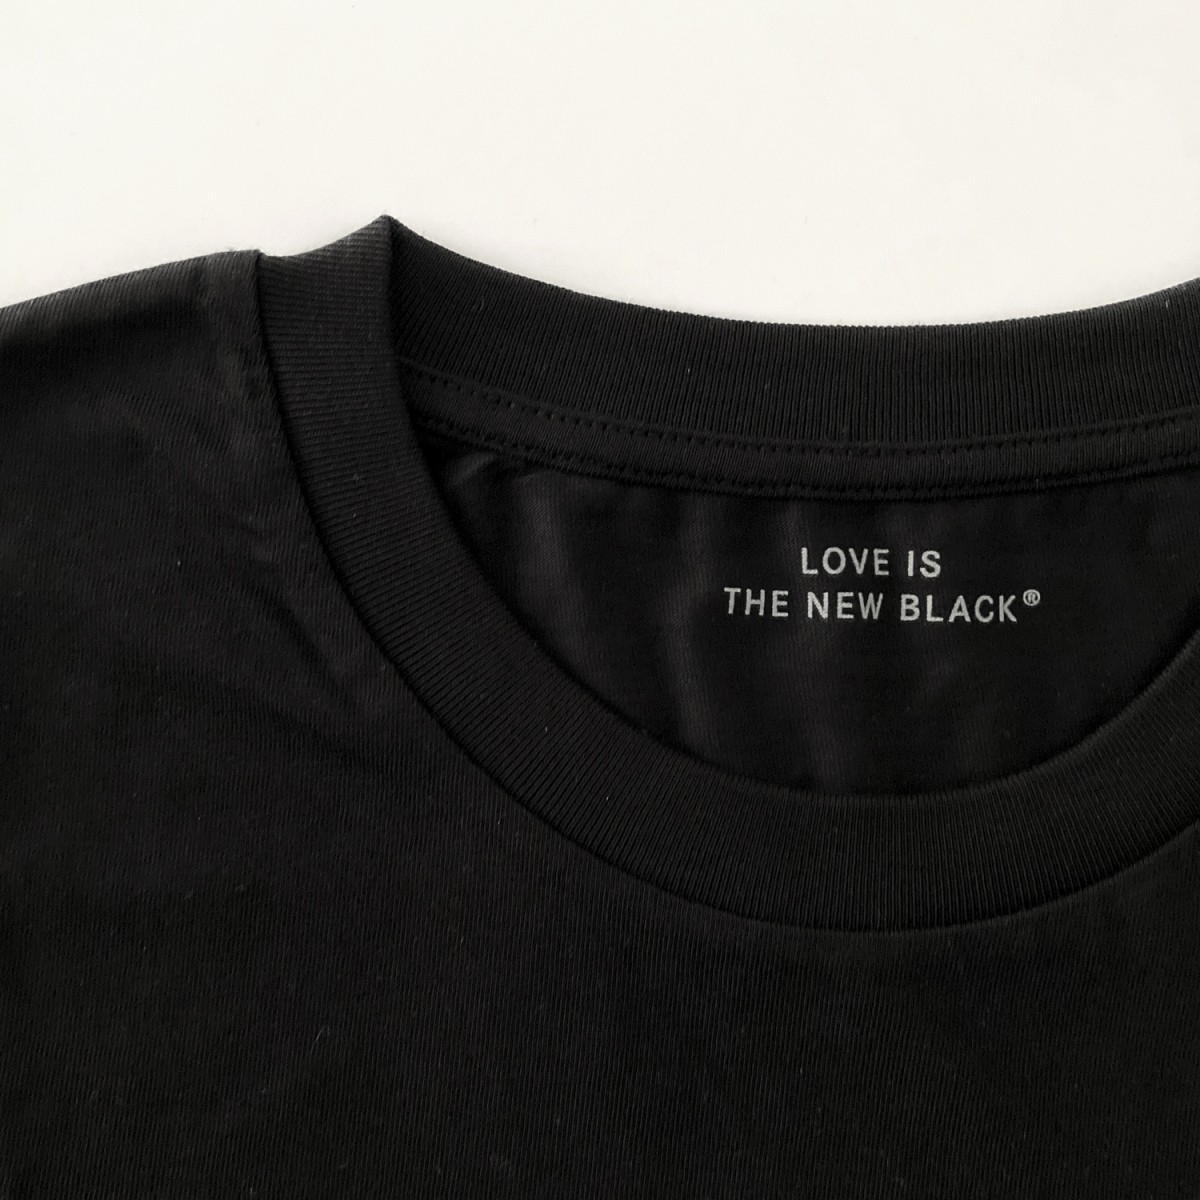 Love is the new black — More Amore / Unisex T-Shirt black